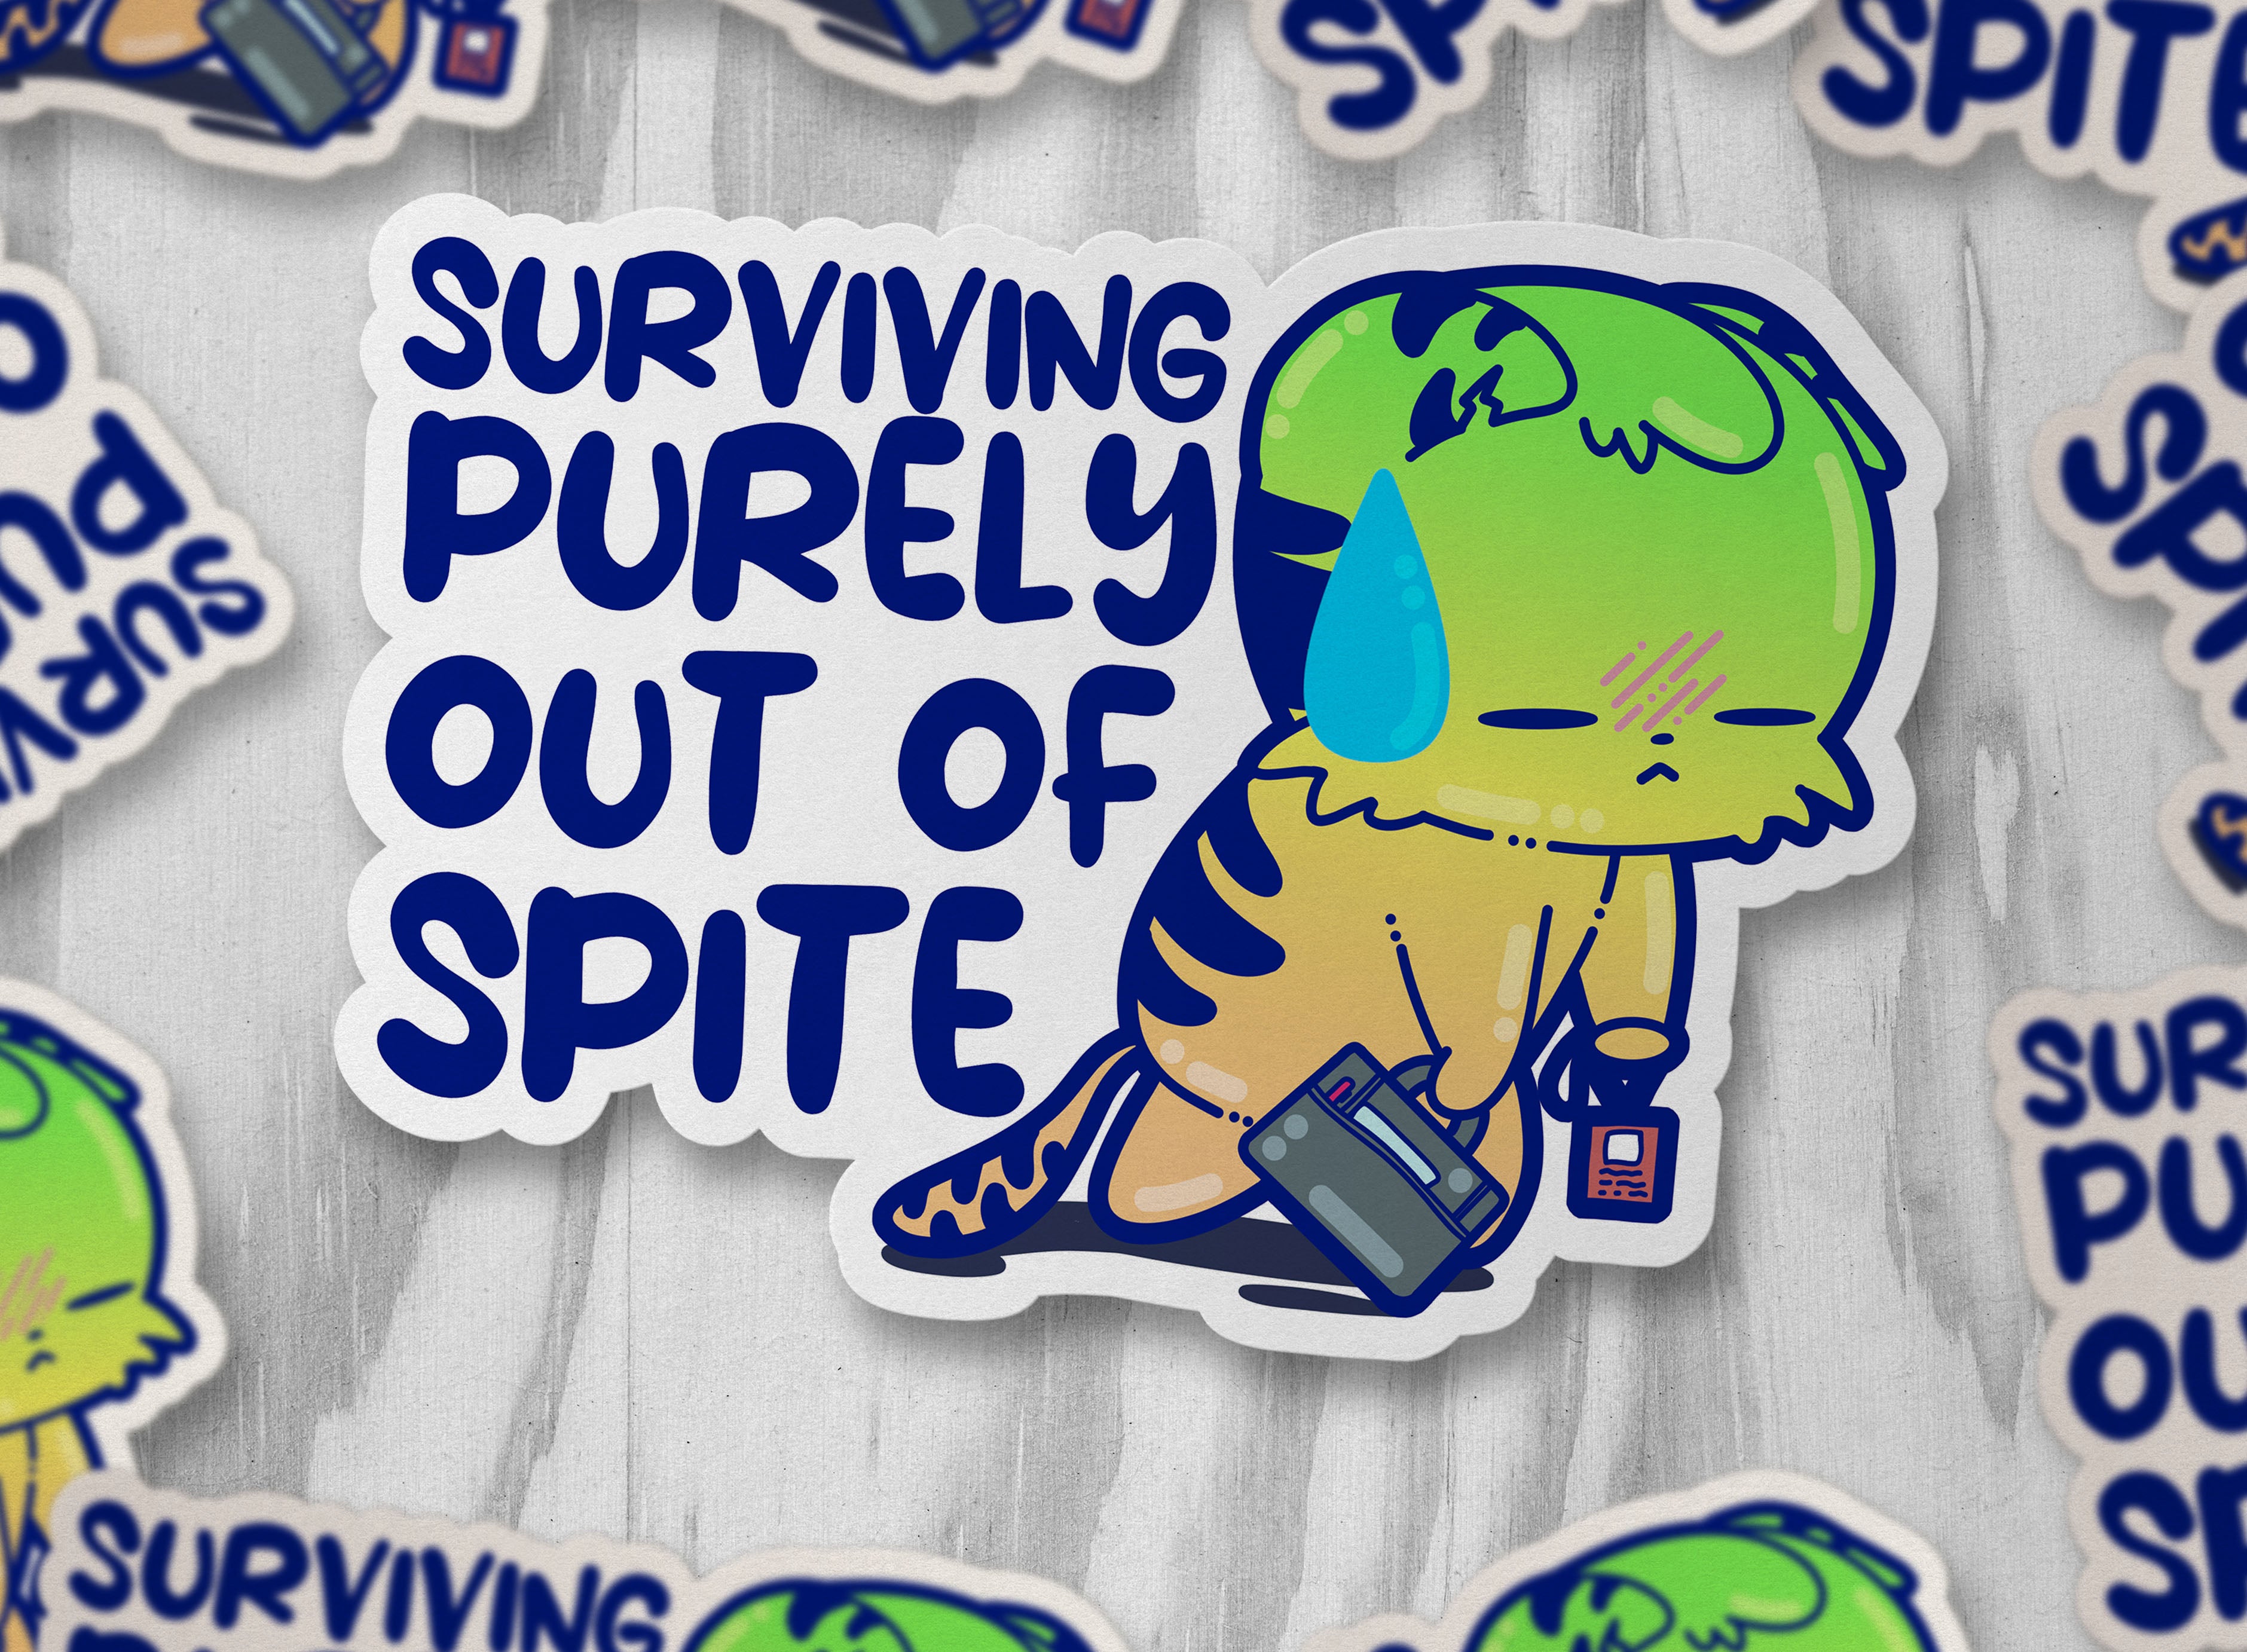 Surviving Purely Out of Spite - ChubbleGumLLC